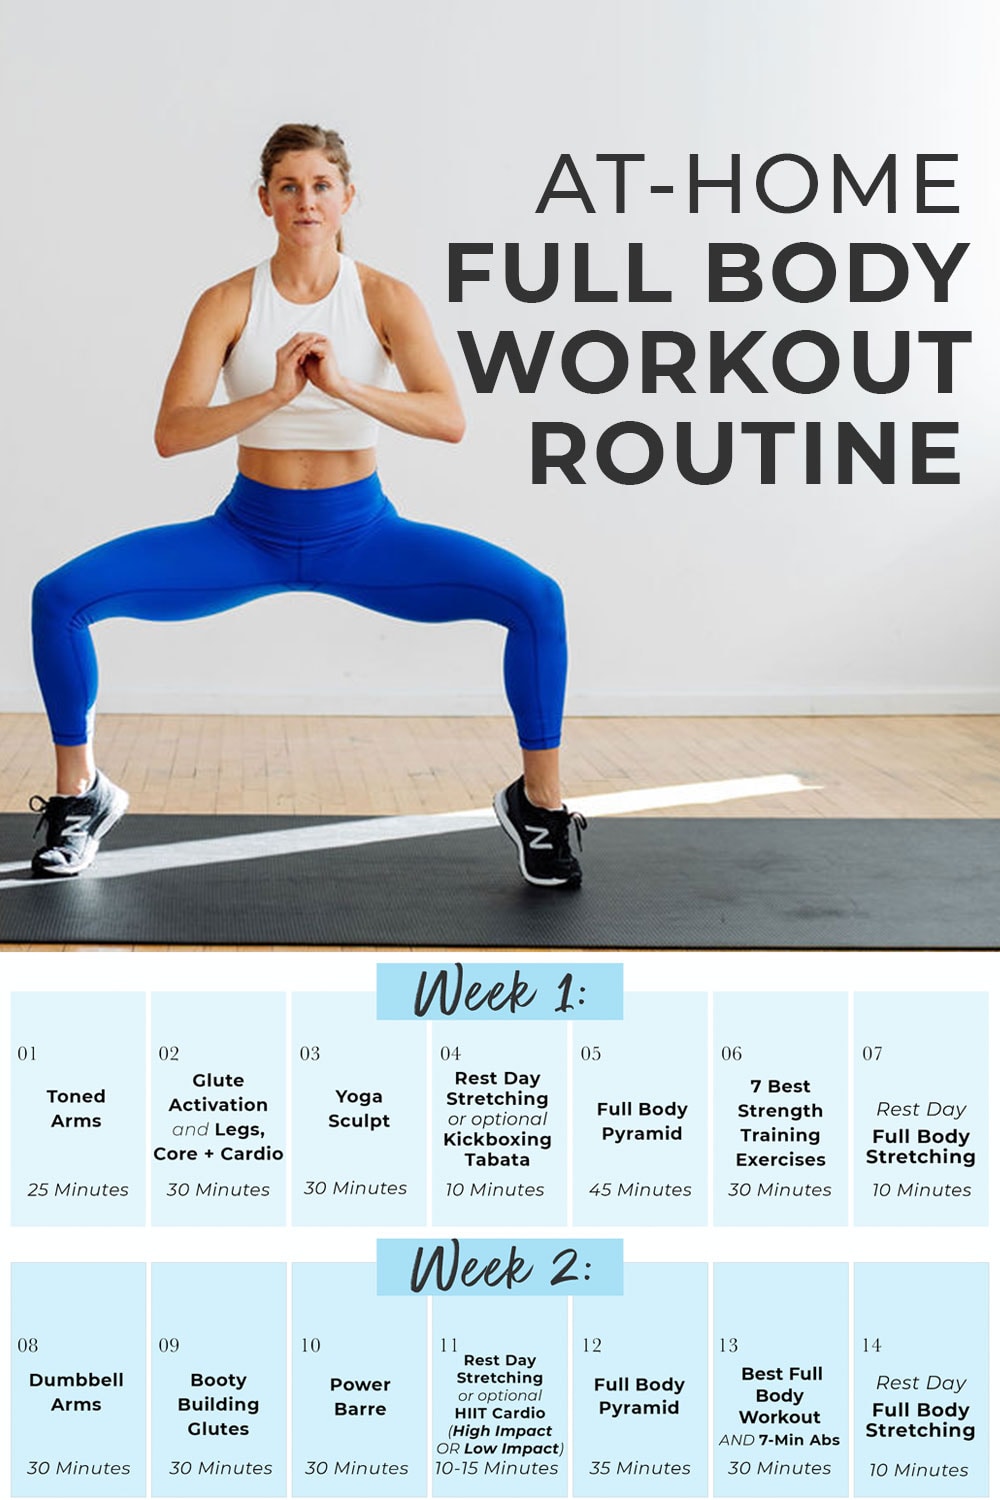 14 Day Challenge (FREE Home Workout Plan) | Nourish Move Love